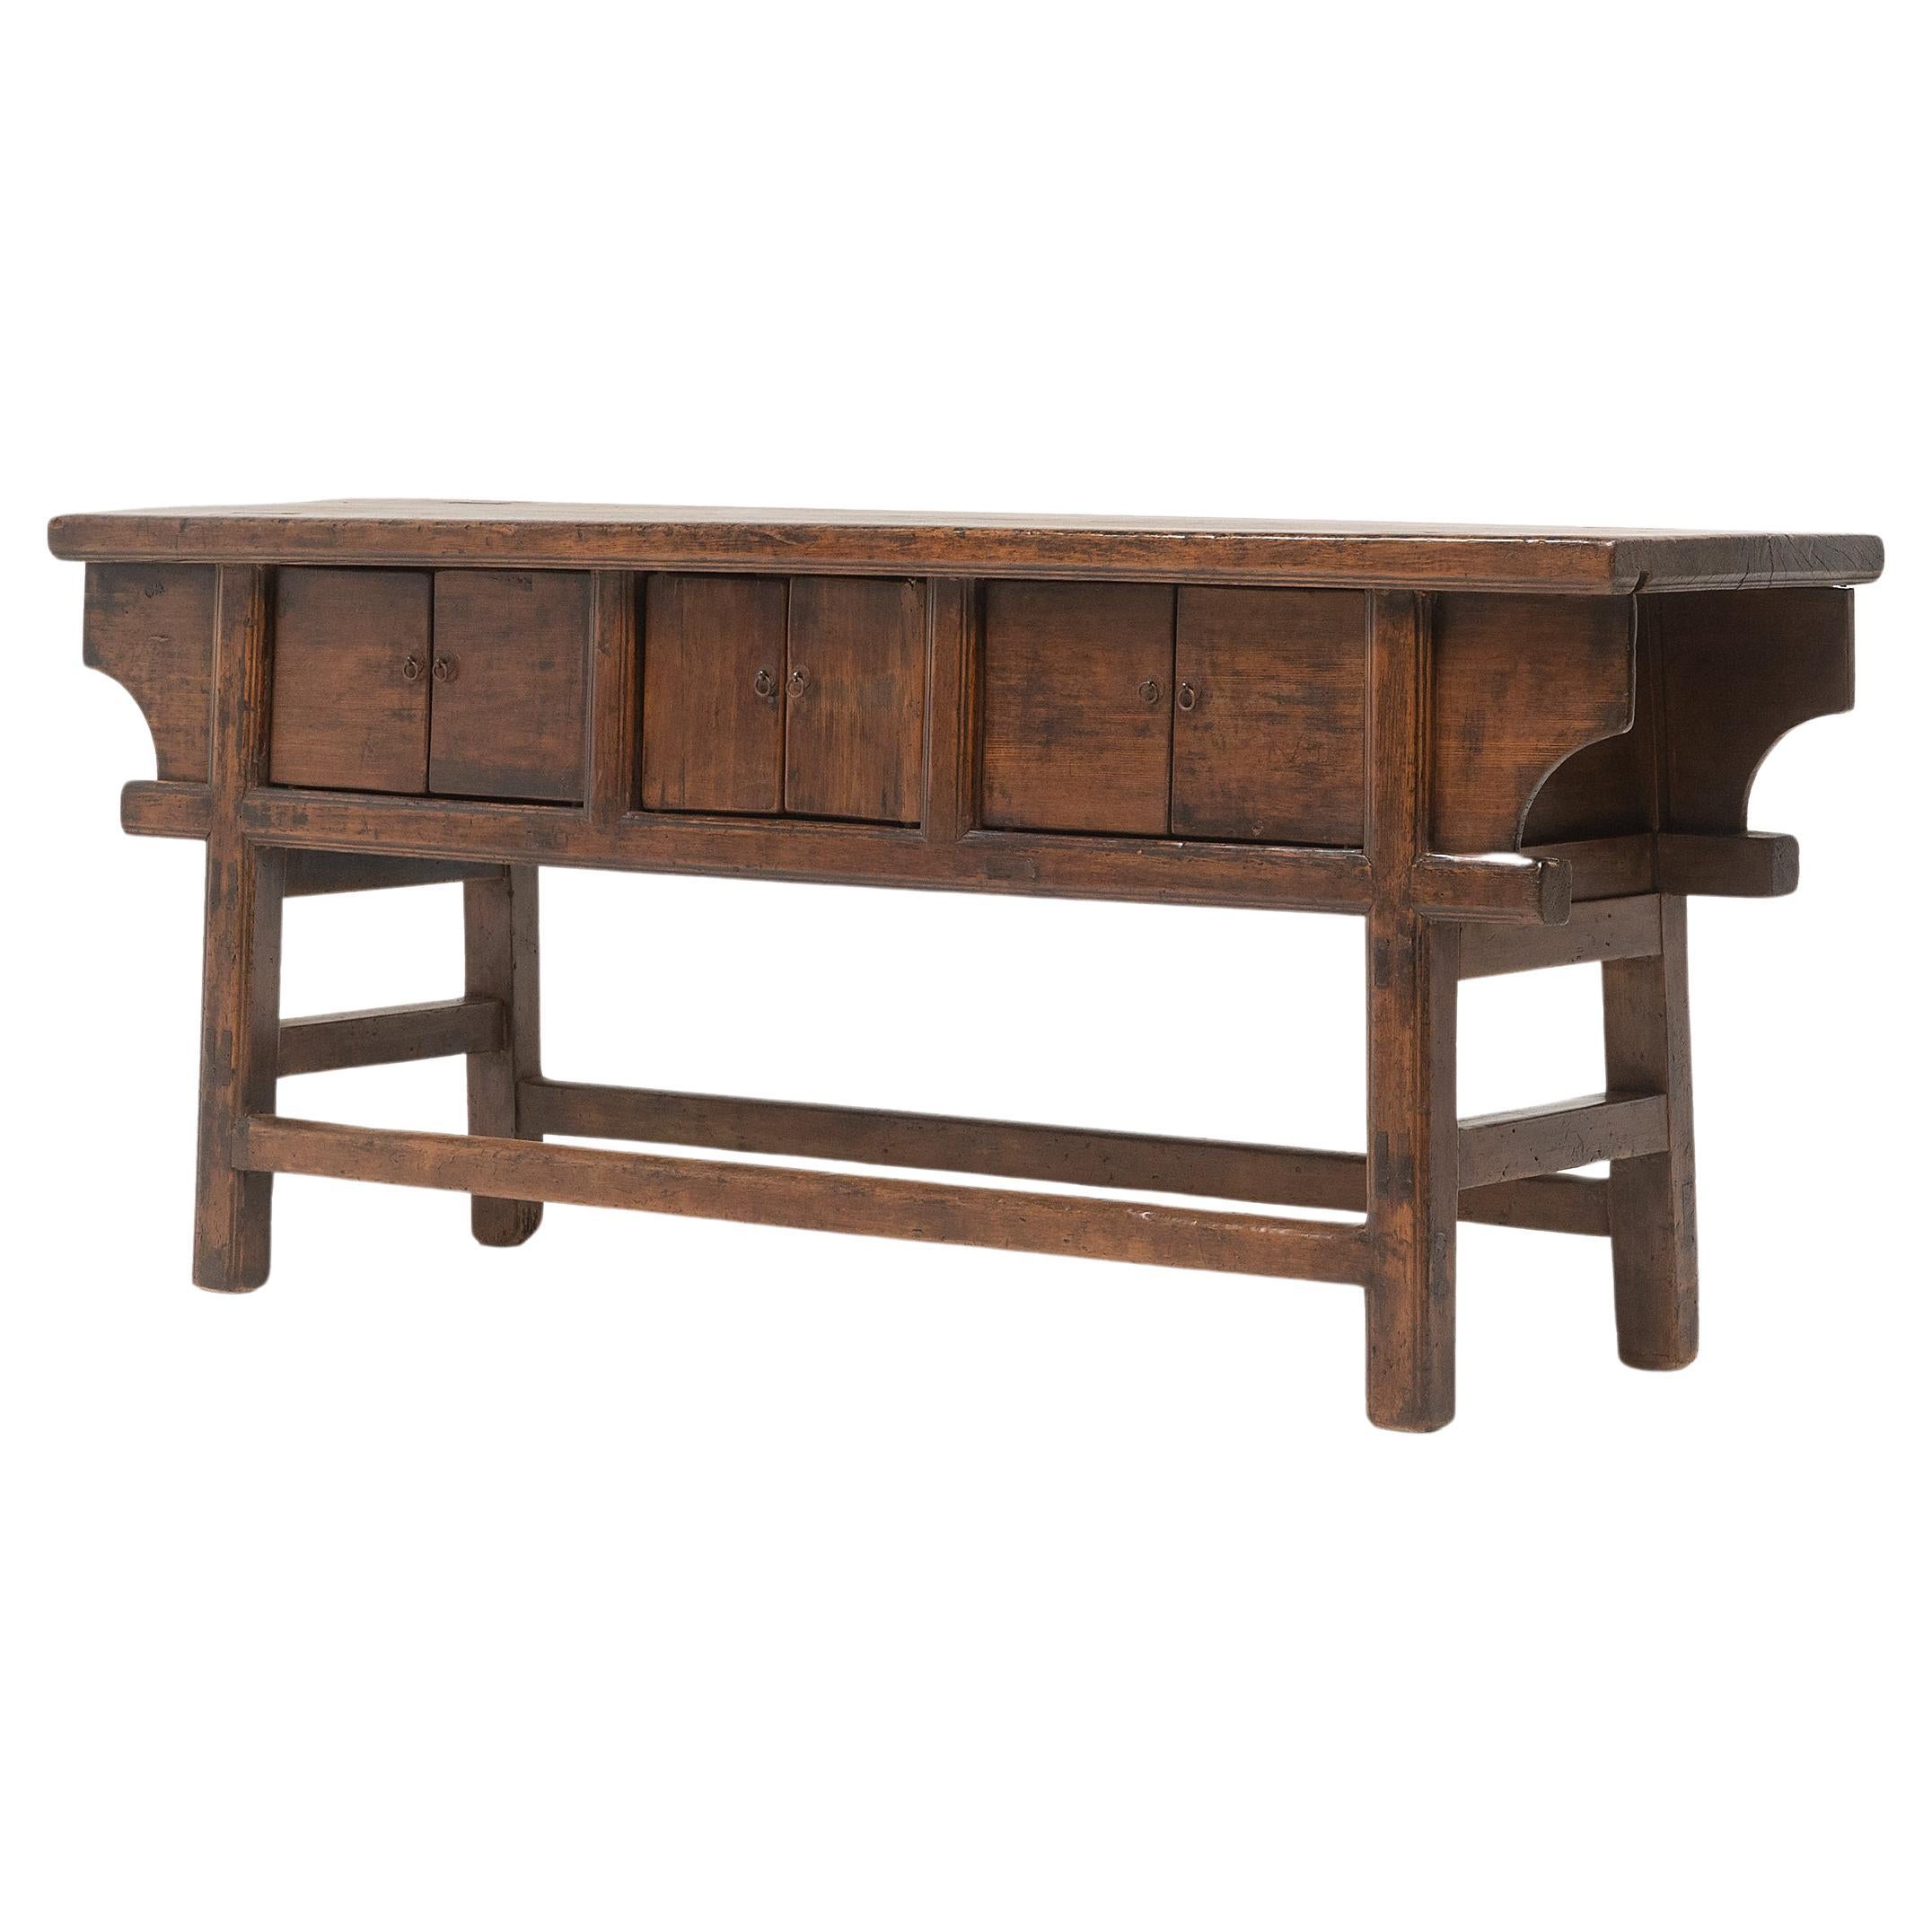 Six-Door Chinese Dongbei Sideboard, c. 1900 For Sale